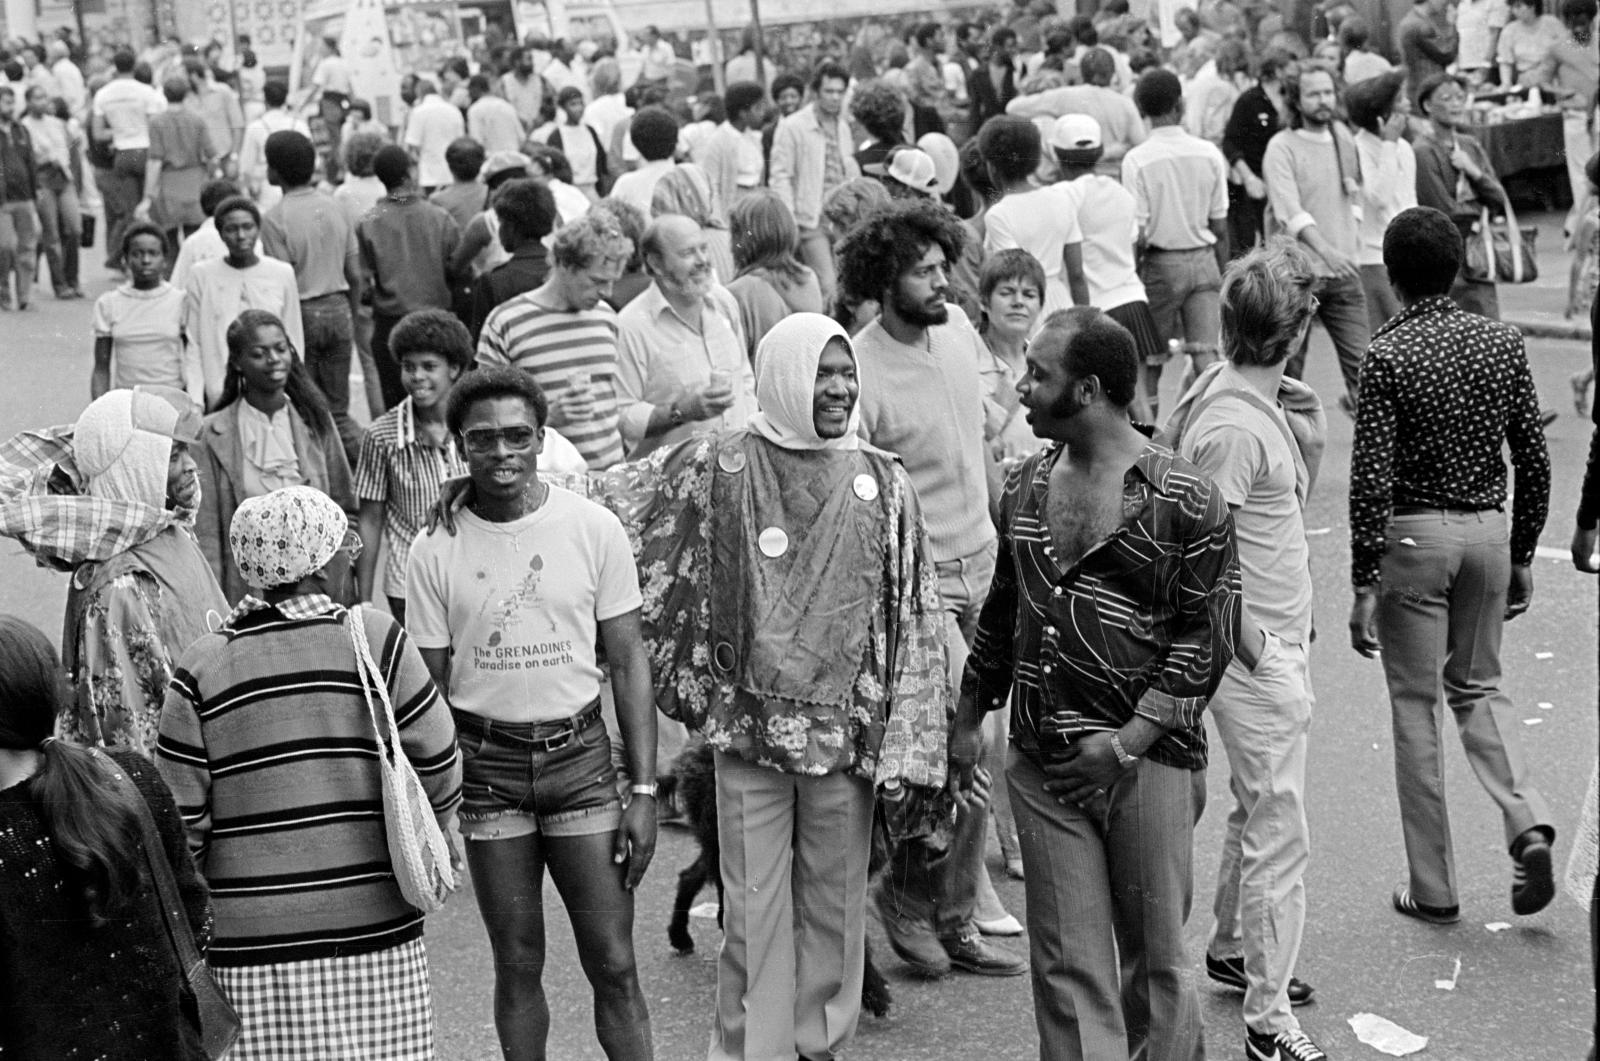 Black and white photo by John Gay of Notting Hill Carnival goers walking along a street.